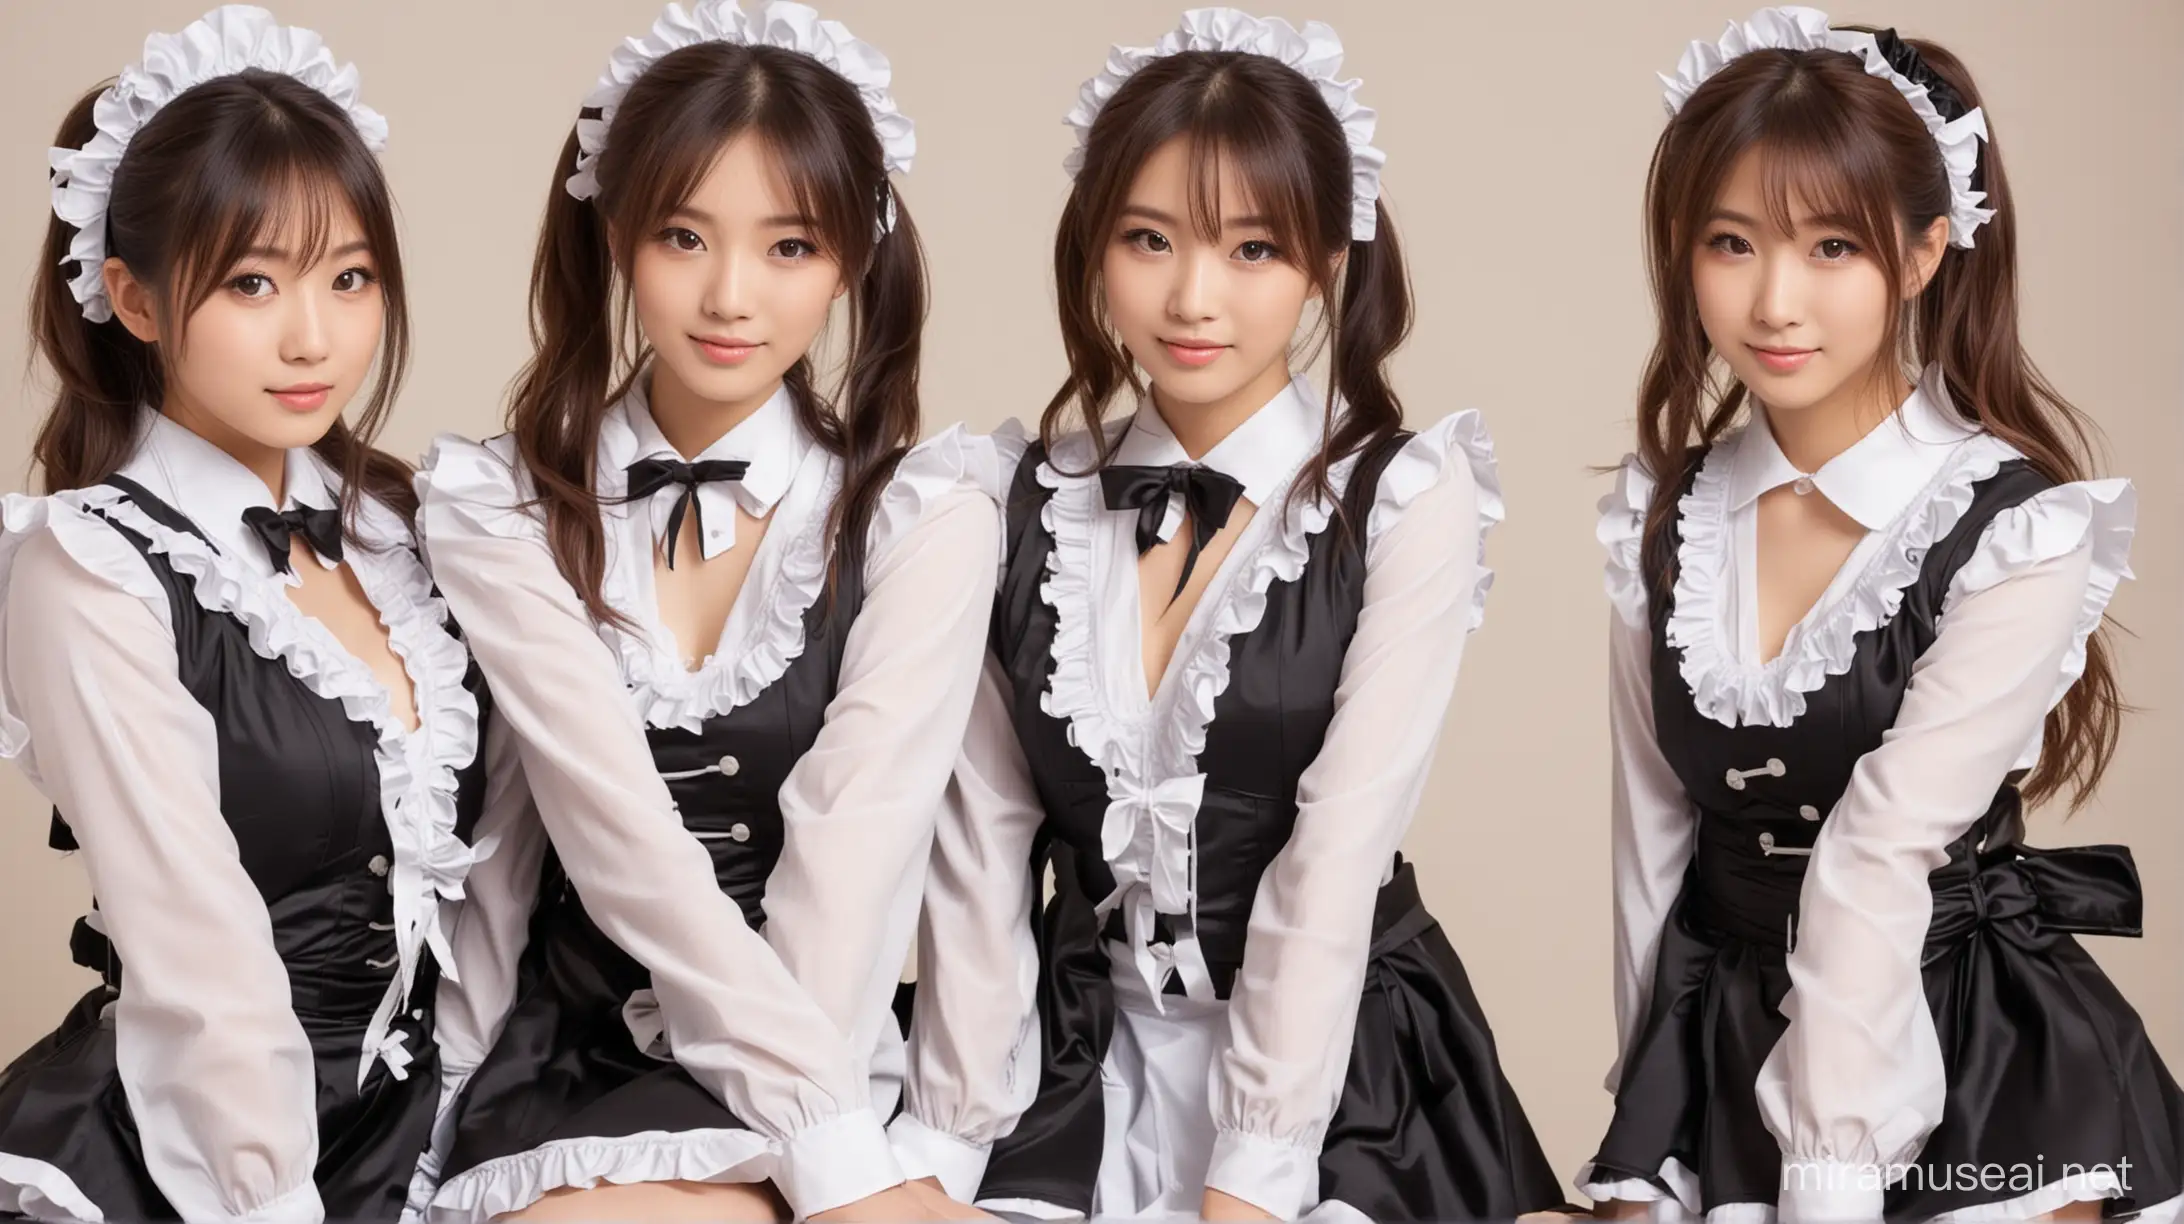 pretty Japanese maids, with black and white maid uniform in poses, sensual curiosity 